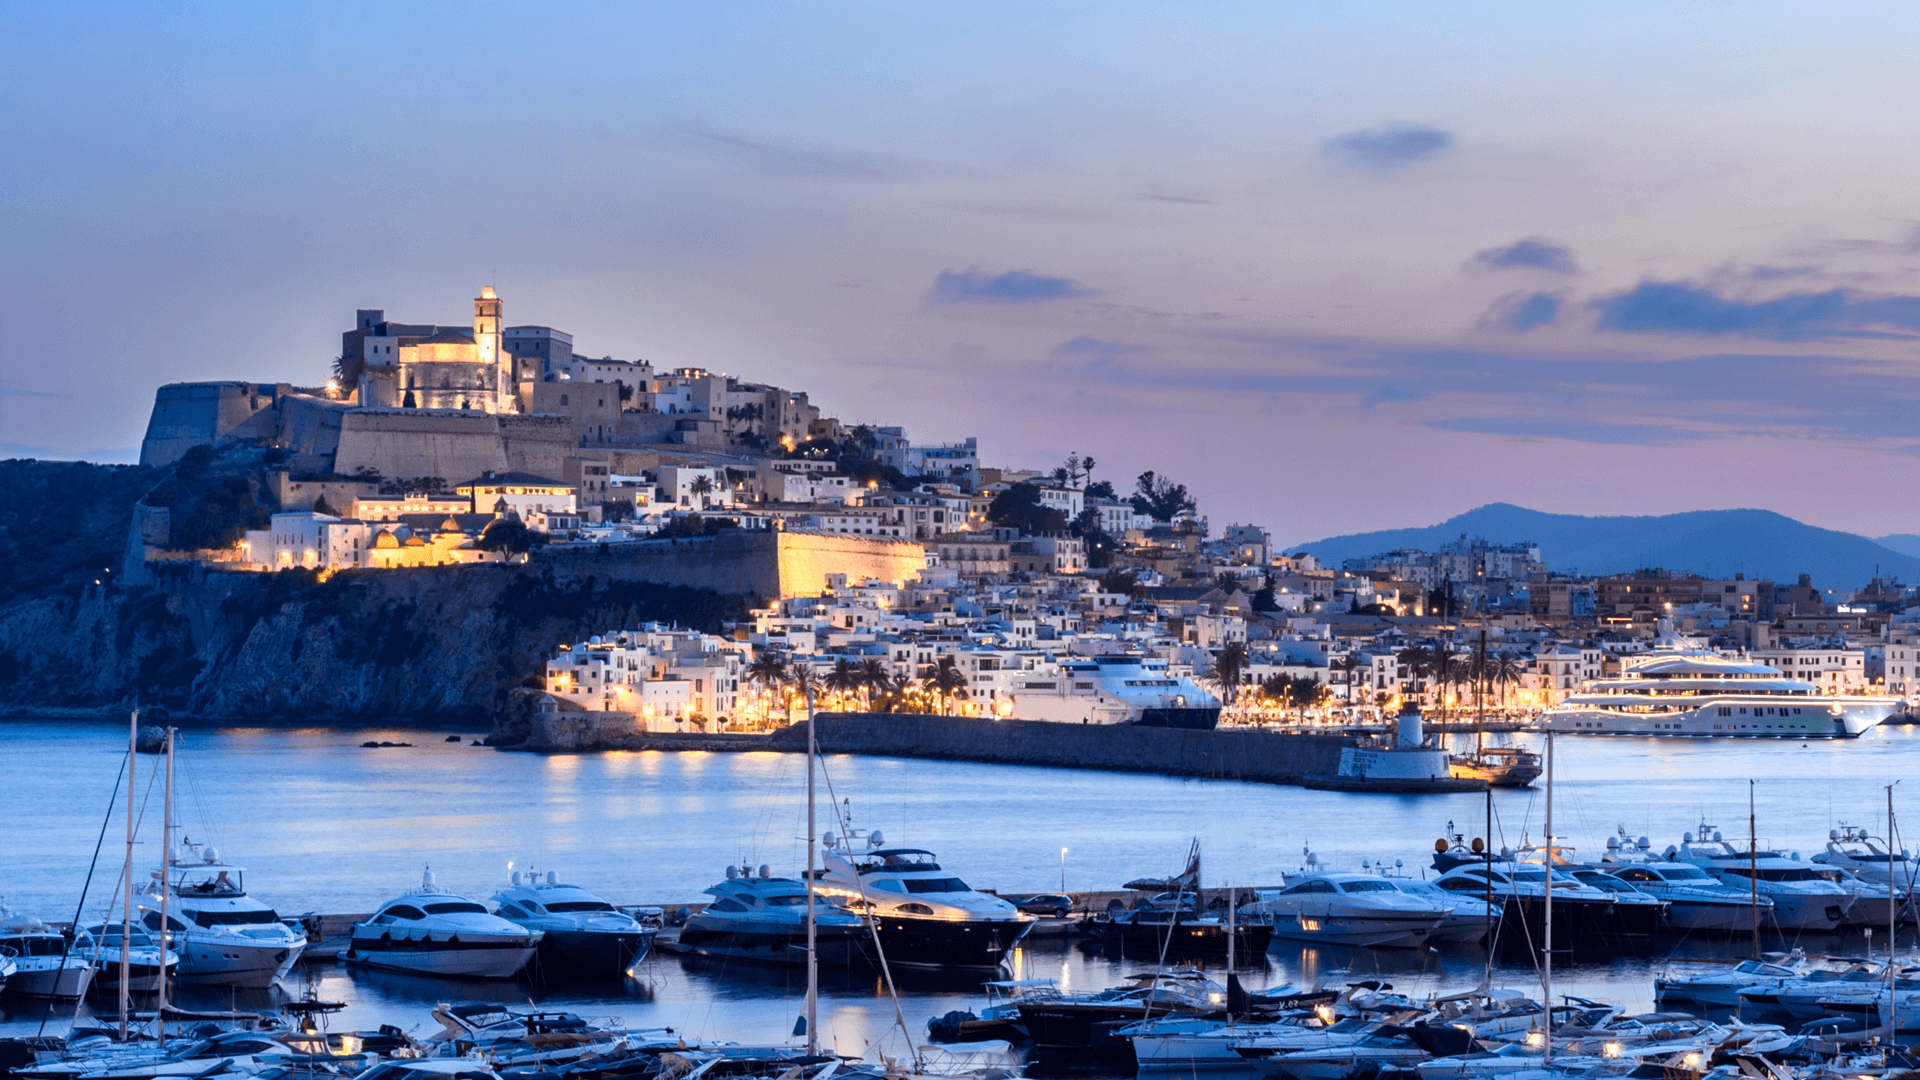 Ibiza, Spain - June 6, 2016: Panoramic view of the city of Ibiza and its port at sunset. The monumental area of Dalt Vila, a World Heritage Site since 1999. The port houses large yachts.
